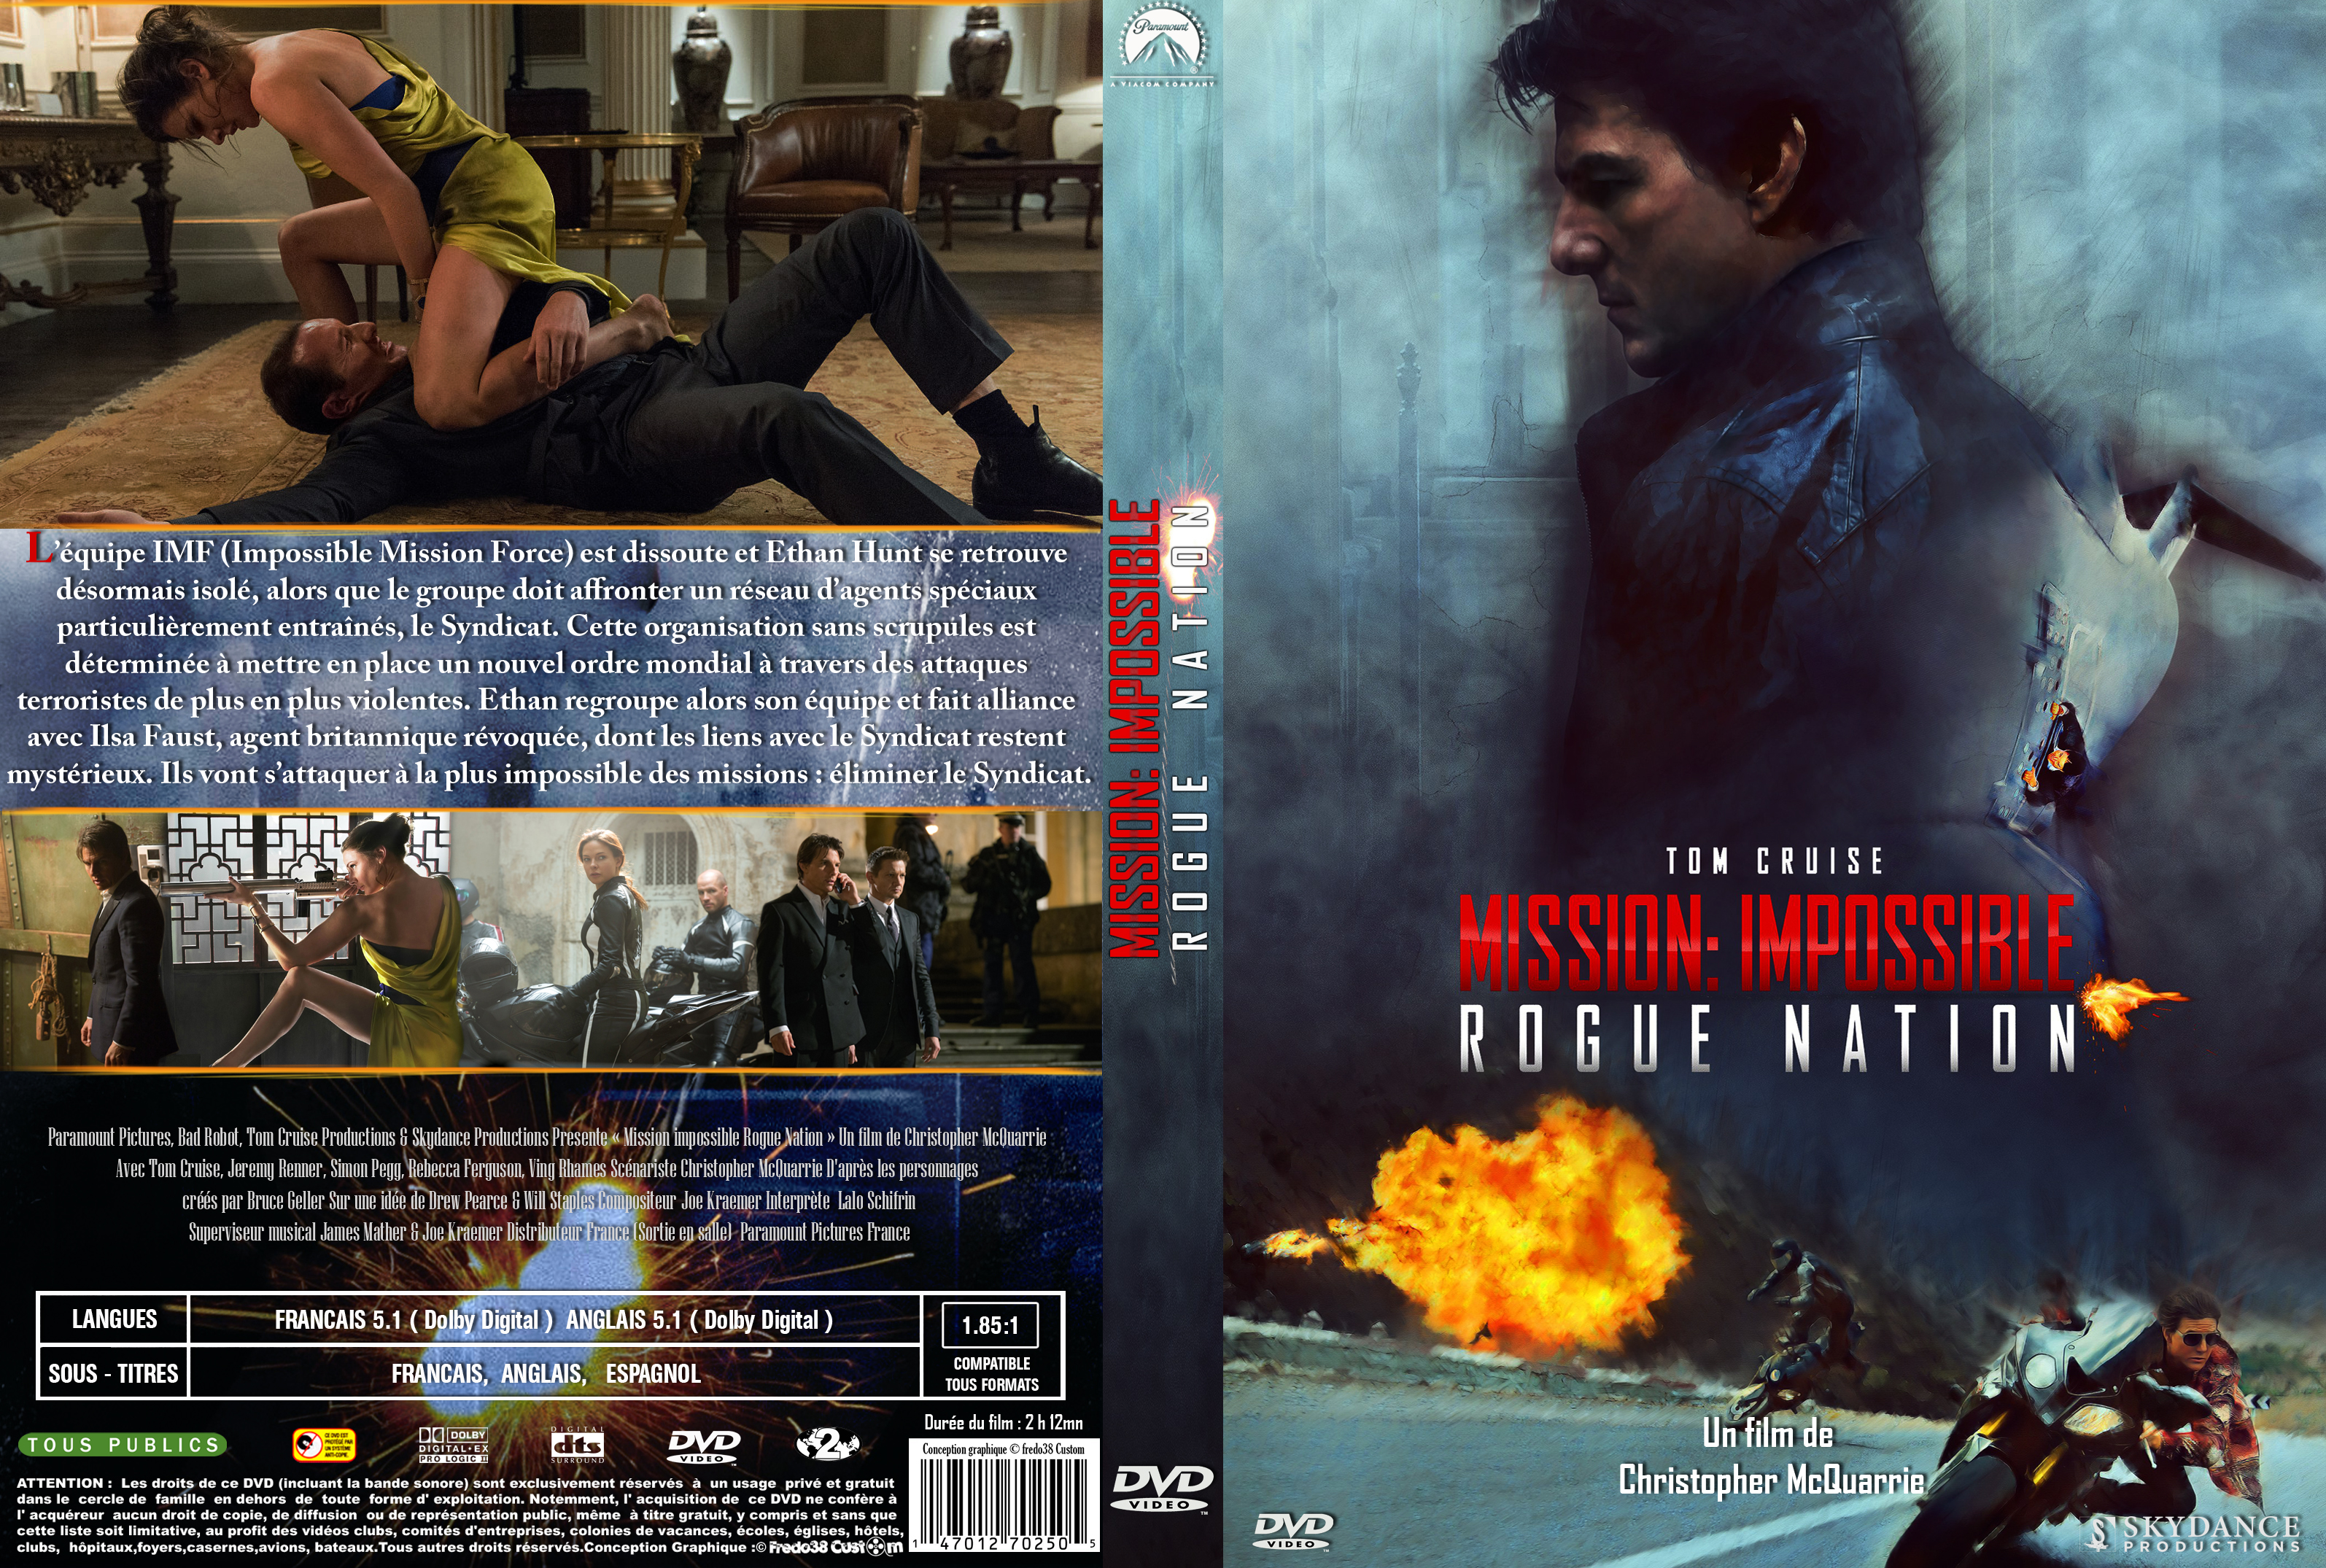 Jaquette DVD Mission : Impossible Rogue Nation custom v3